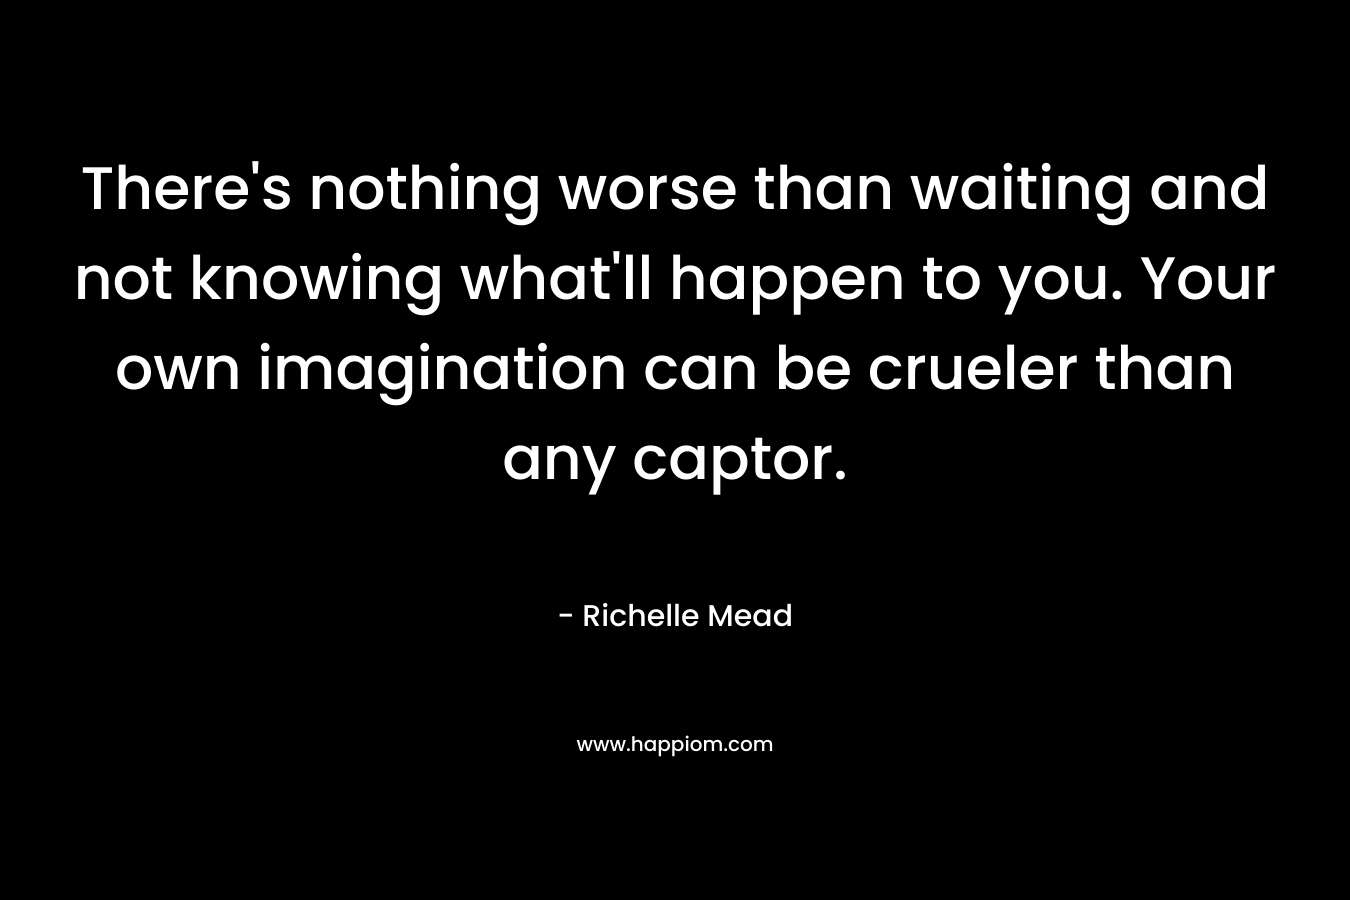 There’s nothing worse than waiting and not knowing what’ll happen to you. Your own imagination can be crueler than any captor. – Richelle Mead